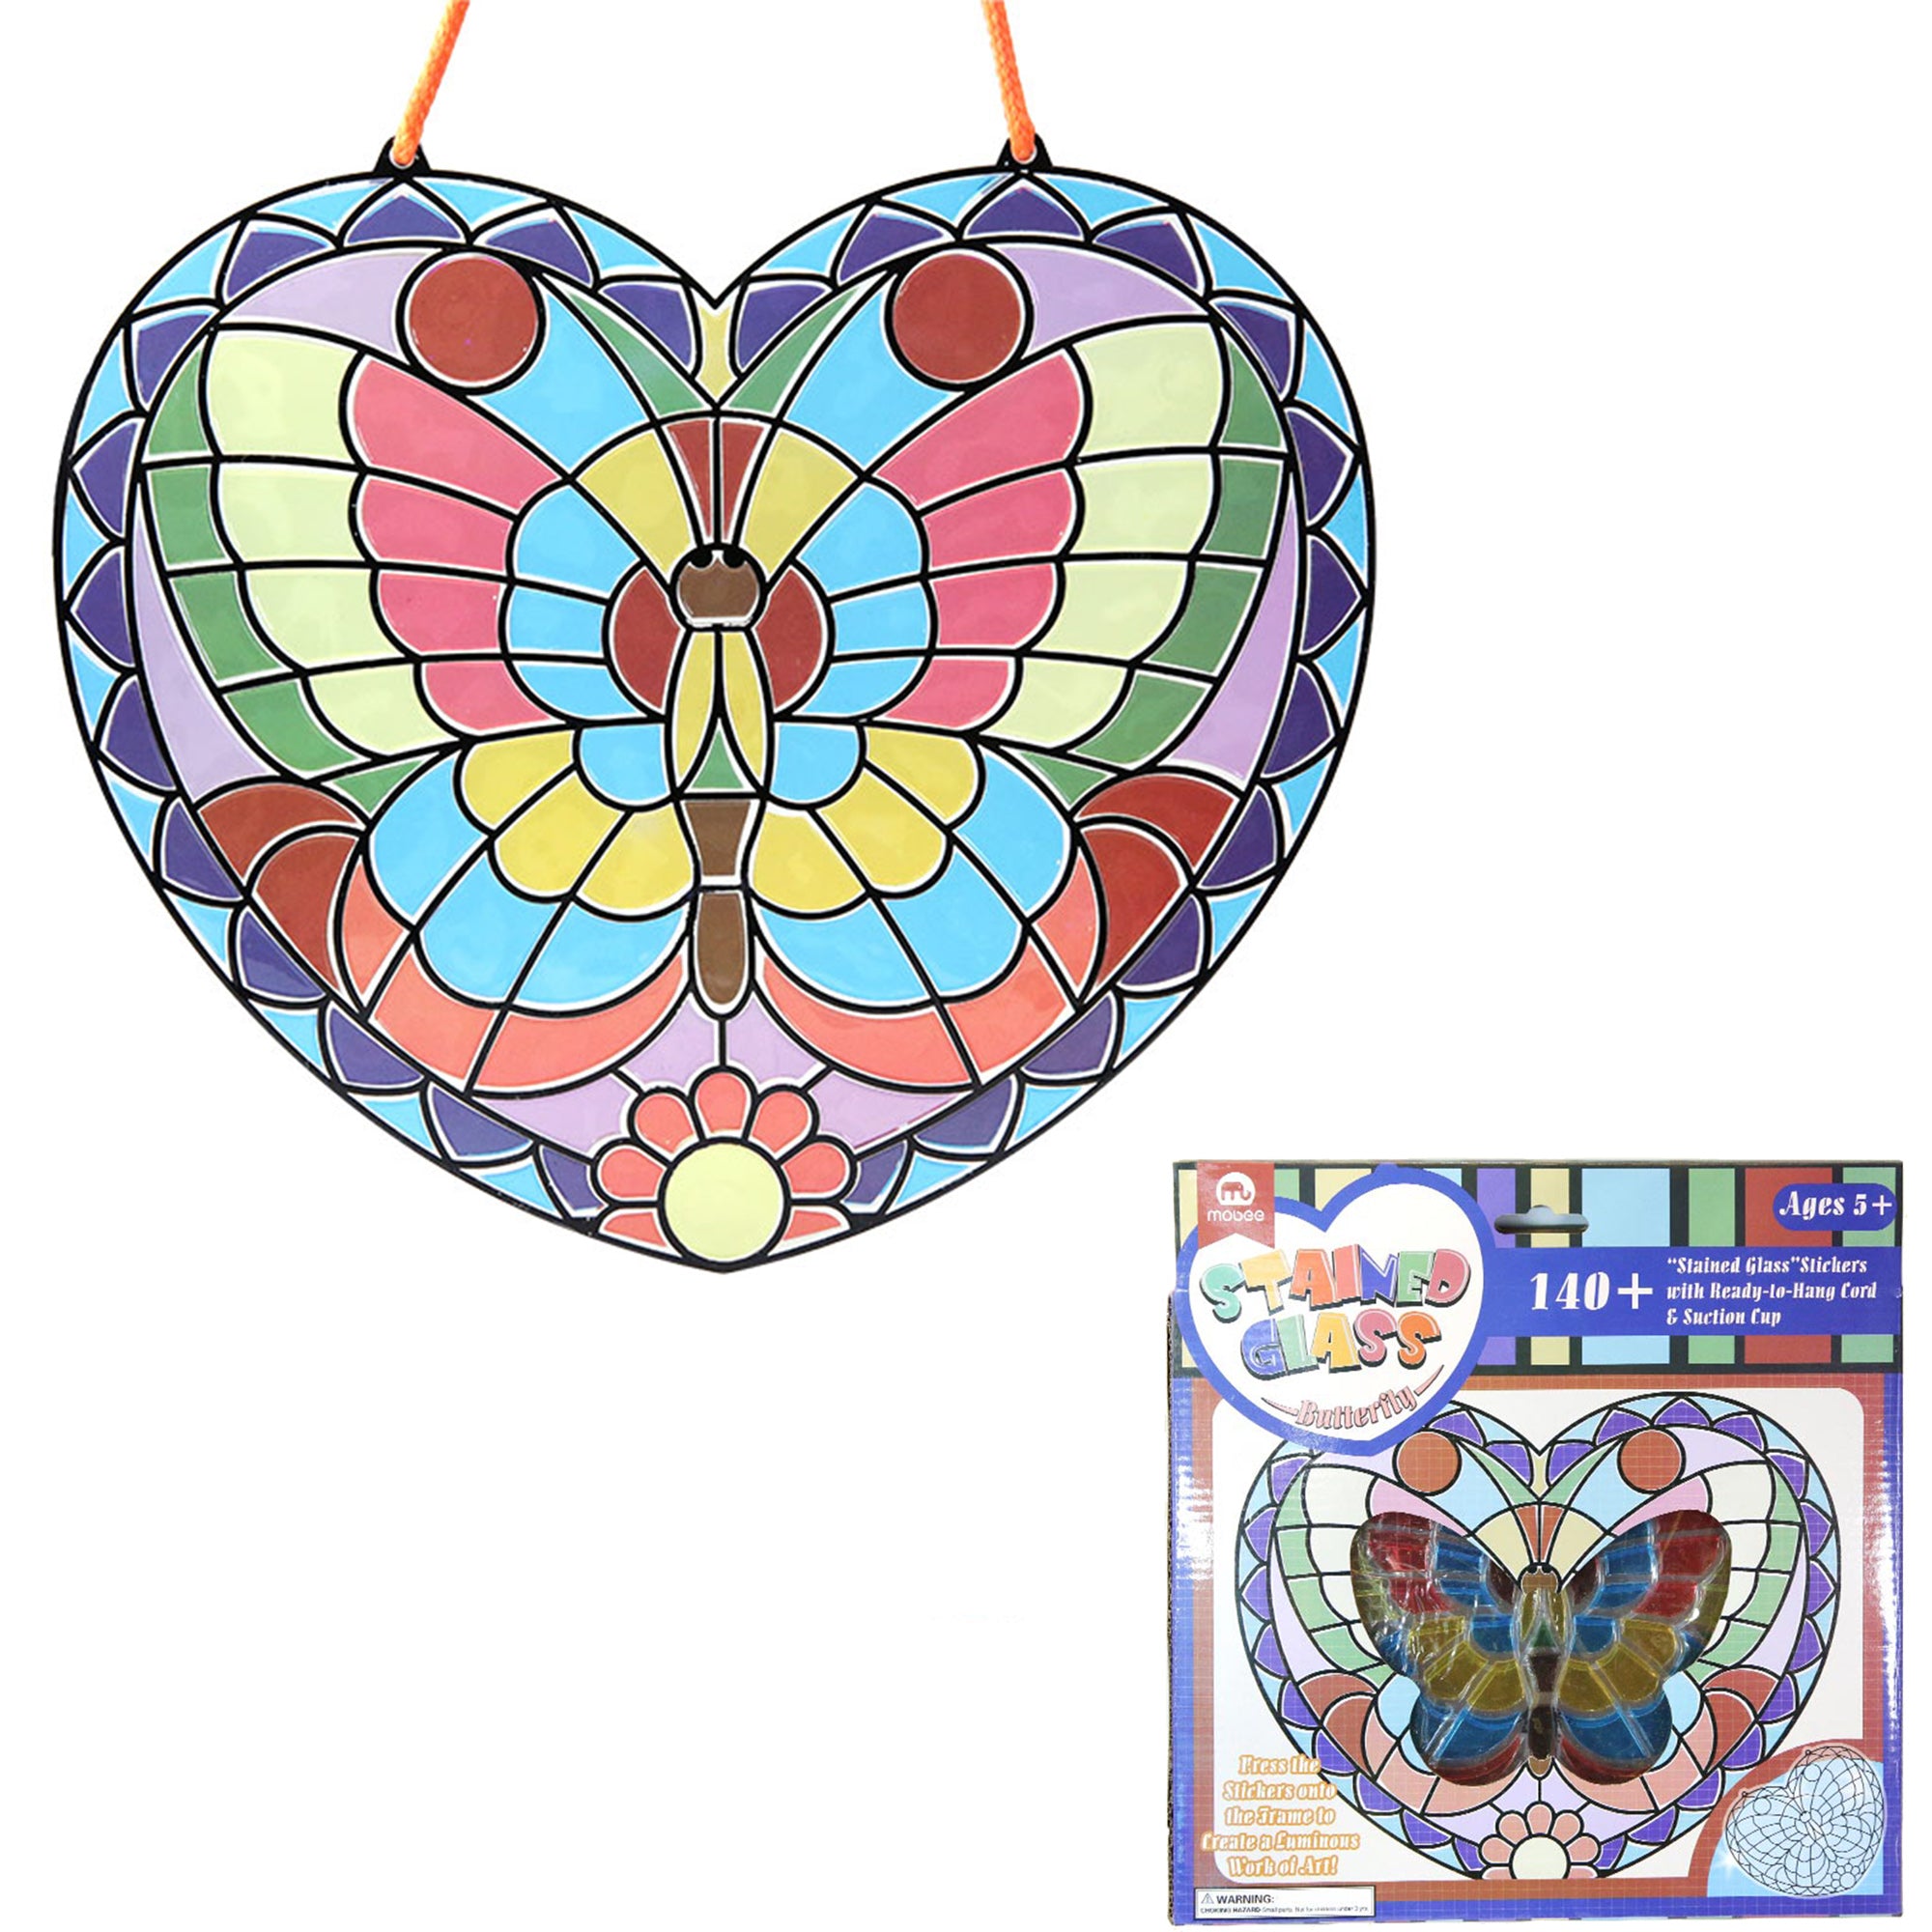 Bosonshop Peel and Press Stained Glass Stickers 140+ Butterfly with Ready-to-Hang Cord and Suction Cup